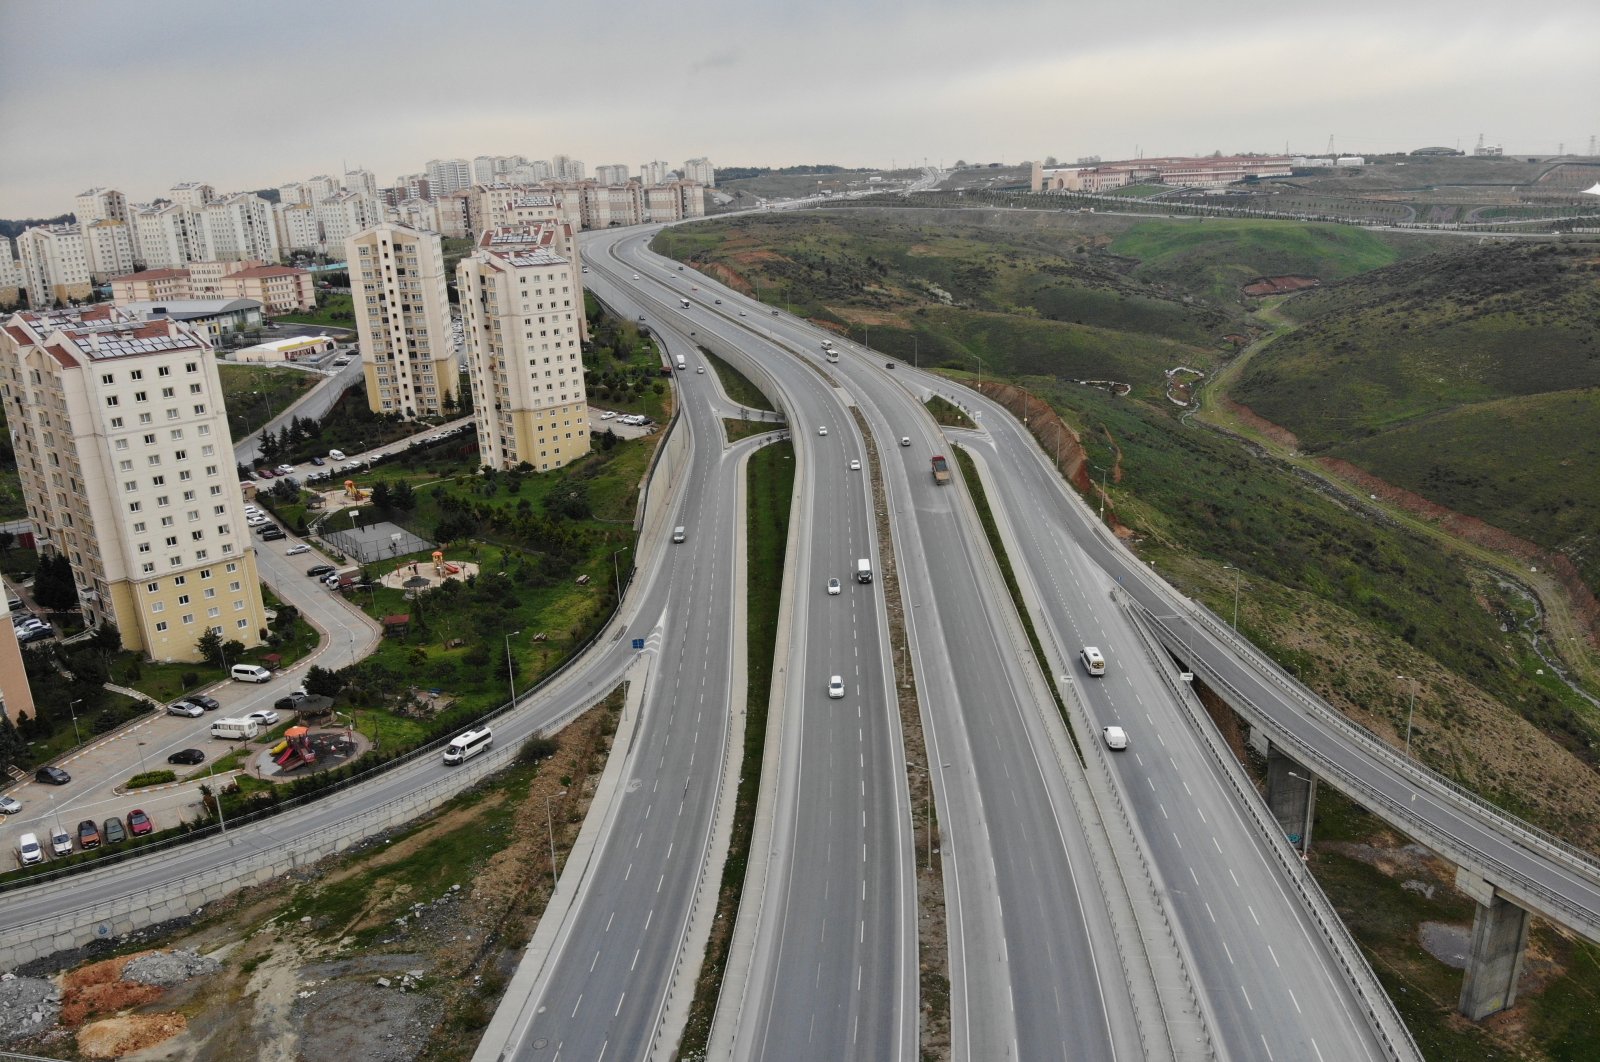 A view of a section of the TEM Highway, in Istanbul, Turkey, April 13, 2022. (IHA PHOTO)